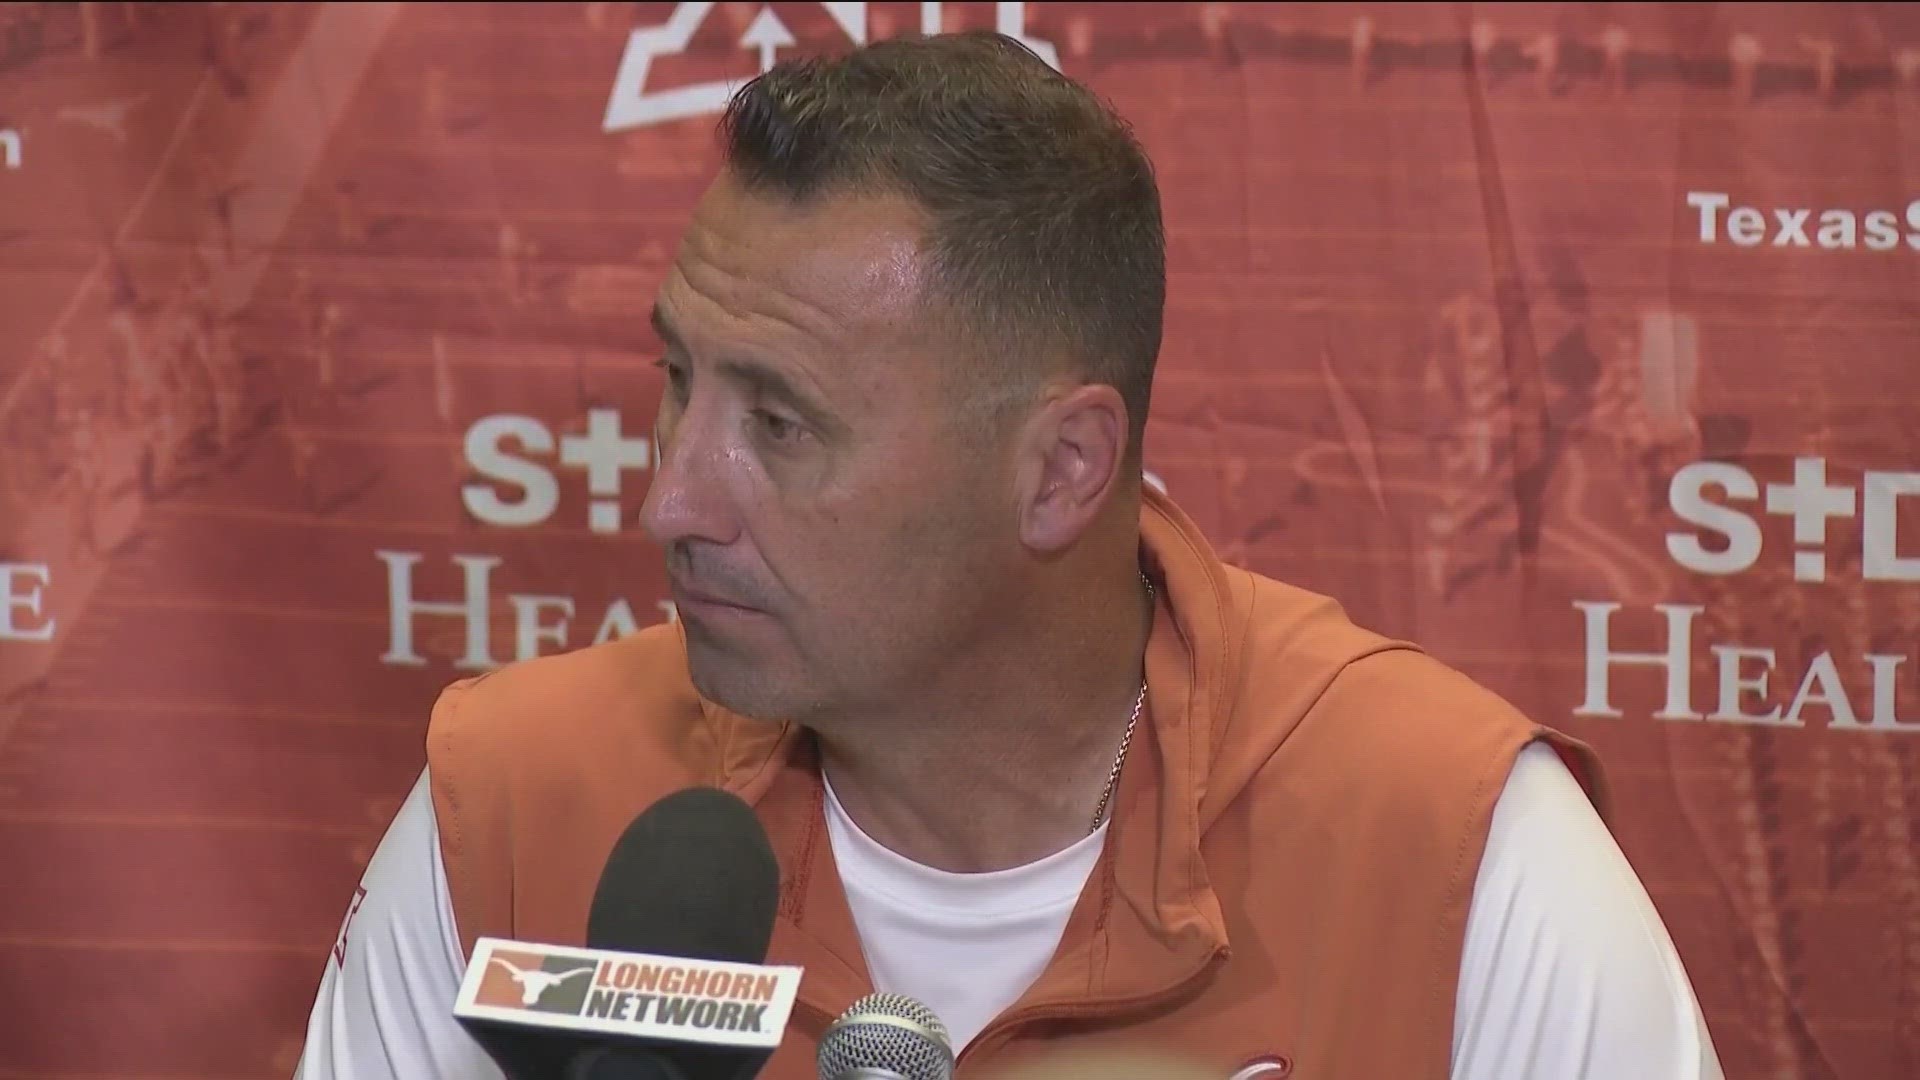 While the win is undoubtedly exciting, head coach Steve Sarkisian is cautioning the Longhorns to stay cautious moving forward.